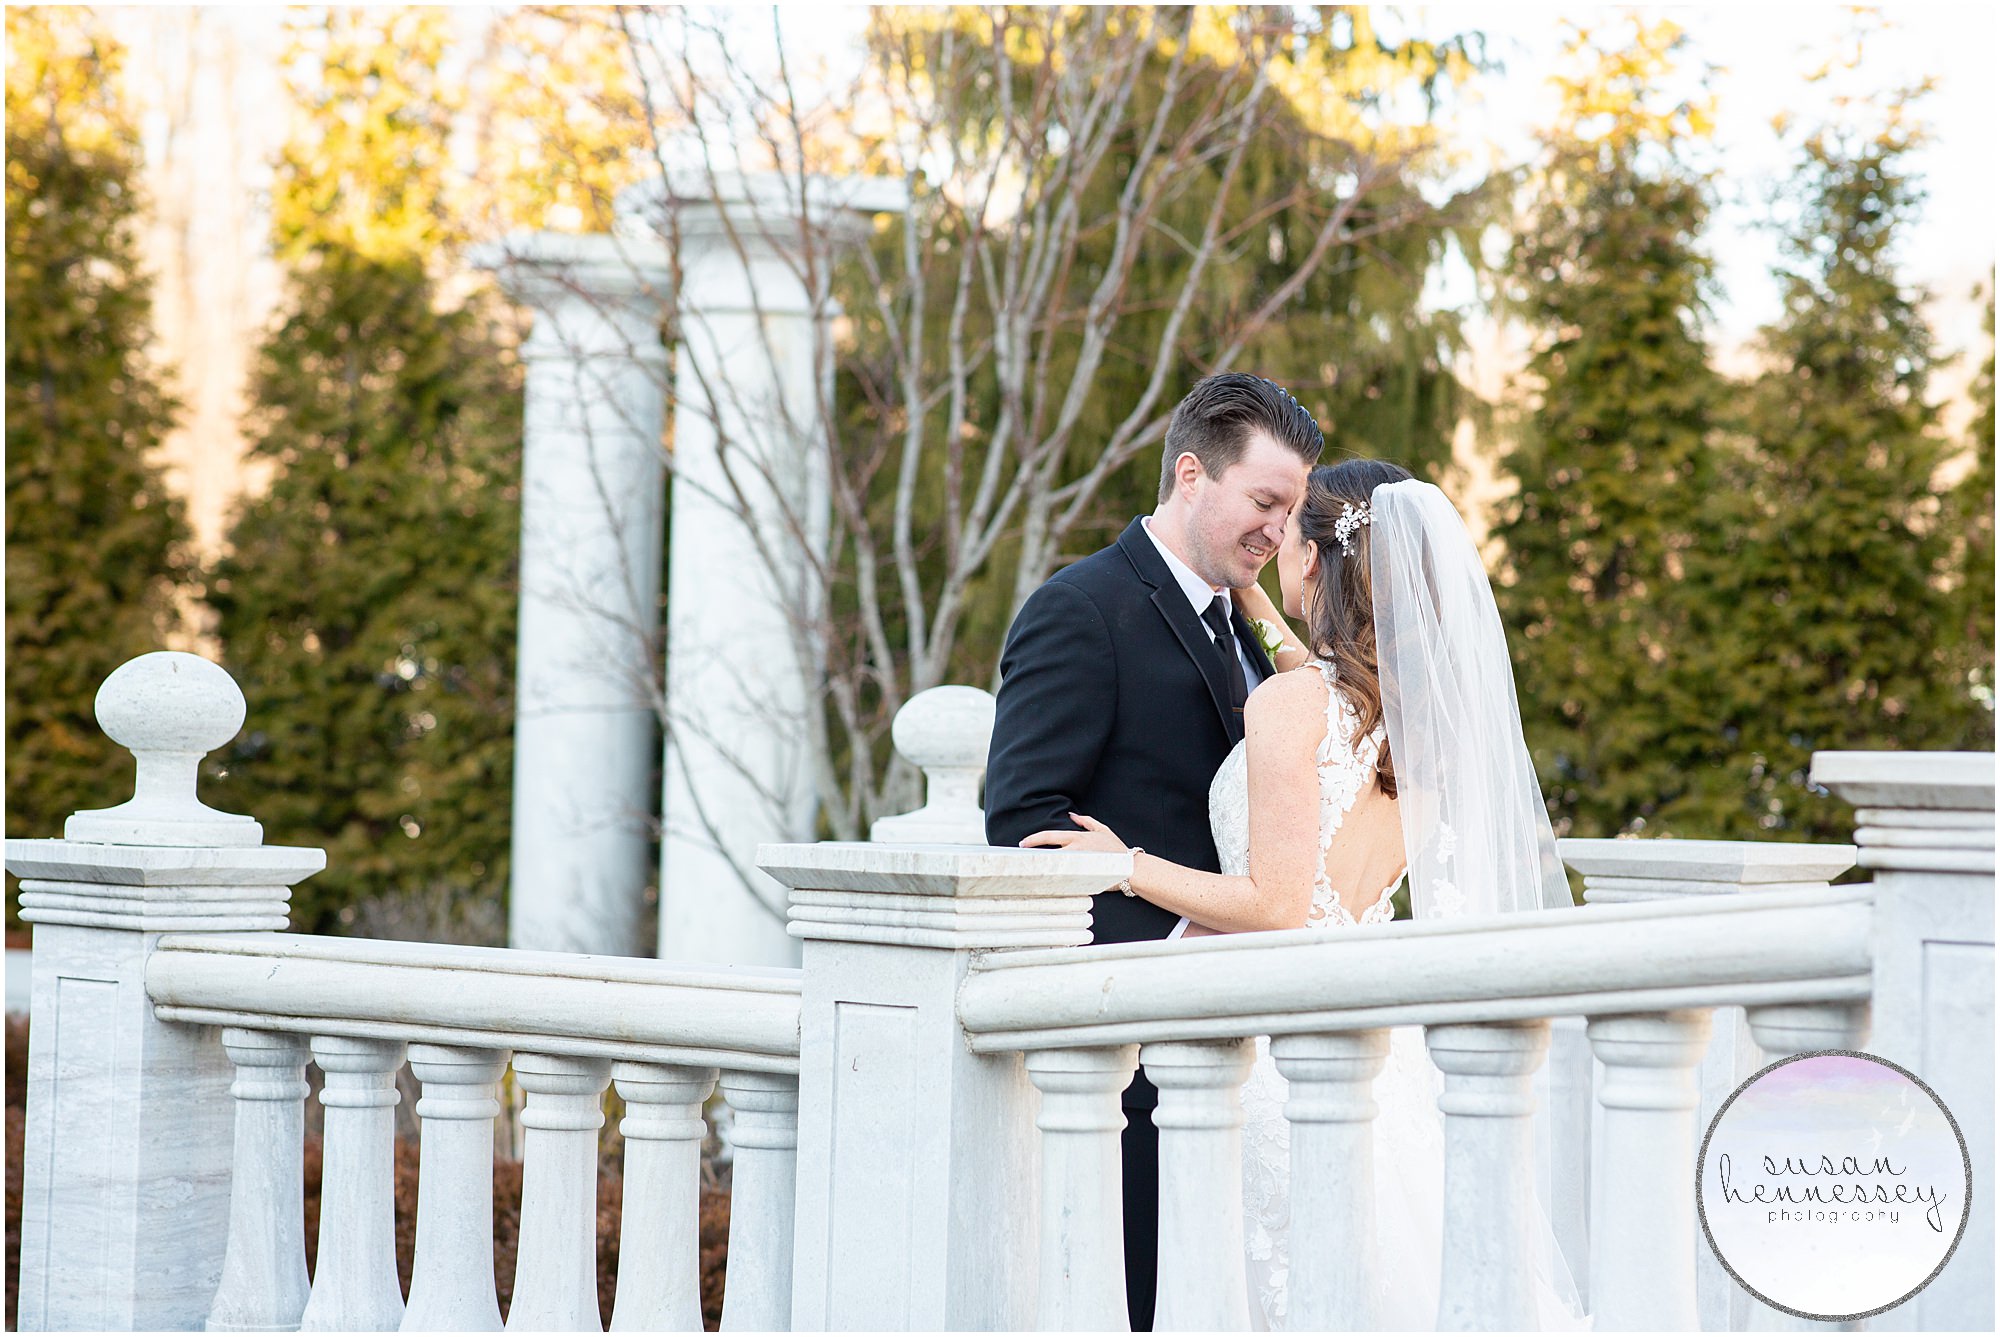 Susan Hennessey Photography Best of 2020 Weddings - The Merion in Cinnaminson couple portraits